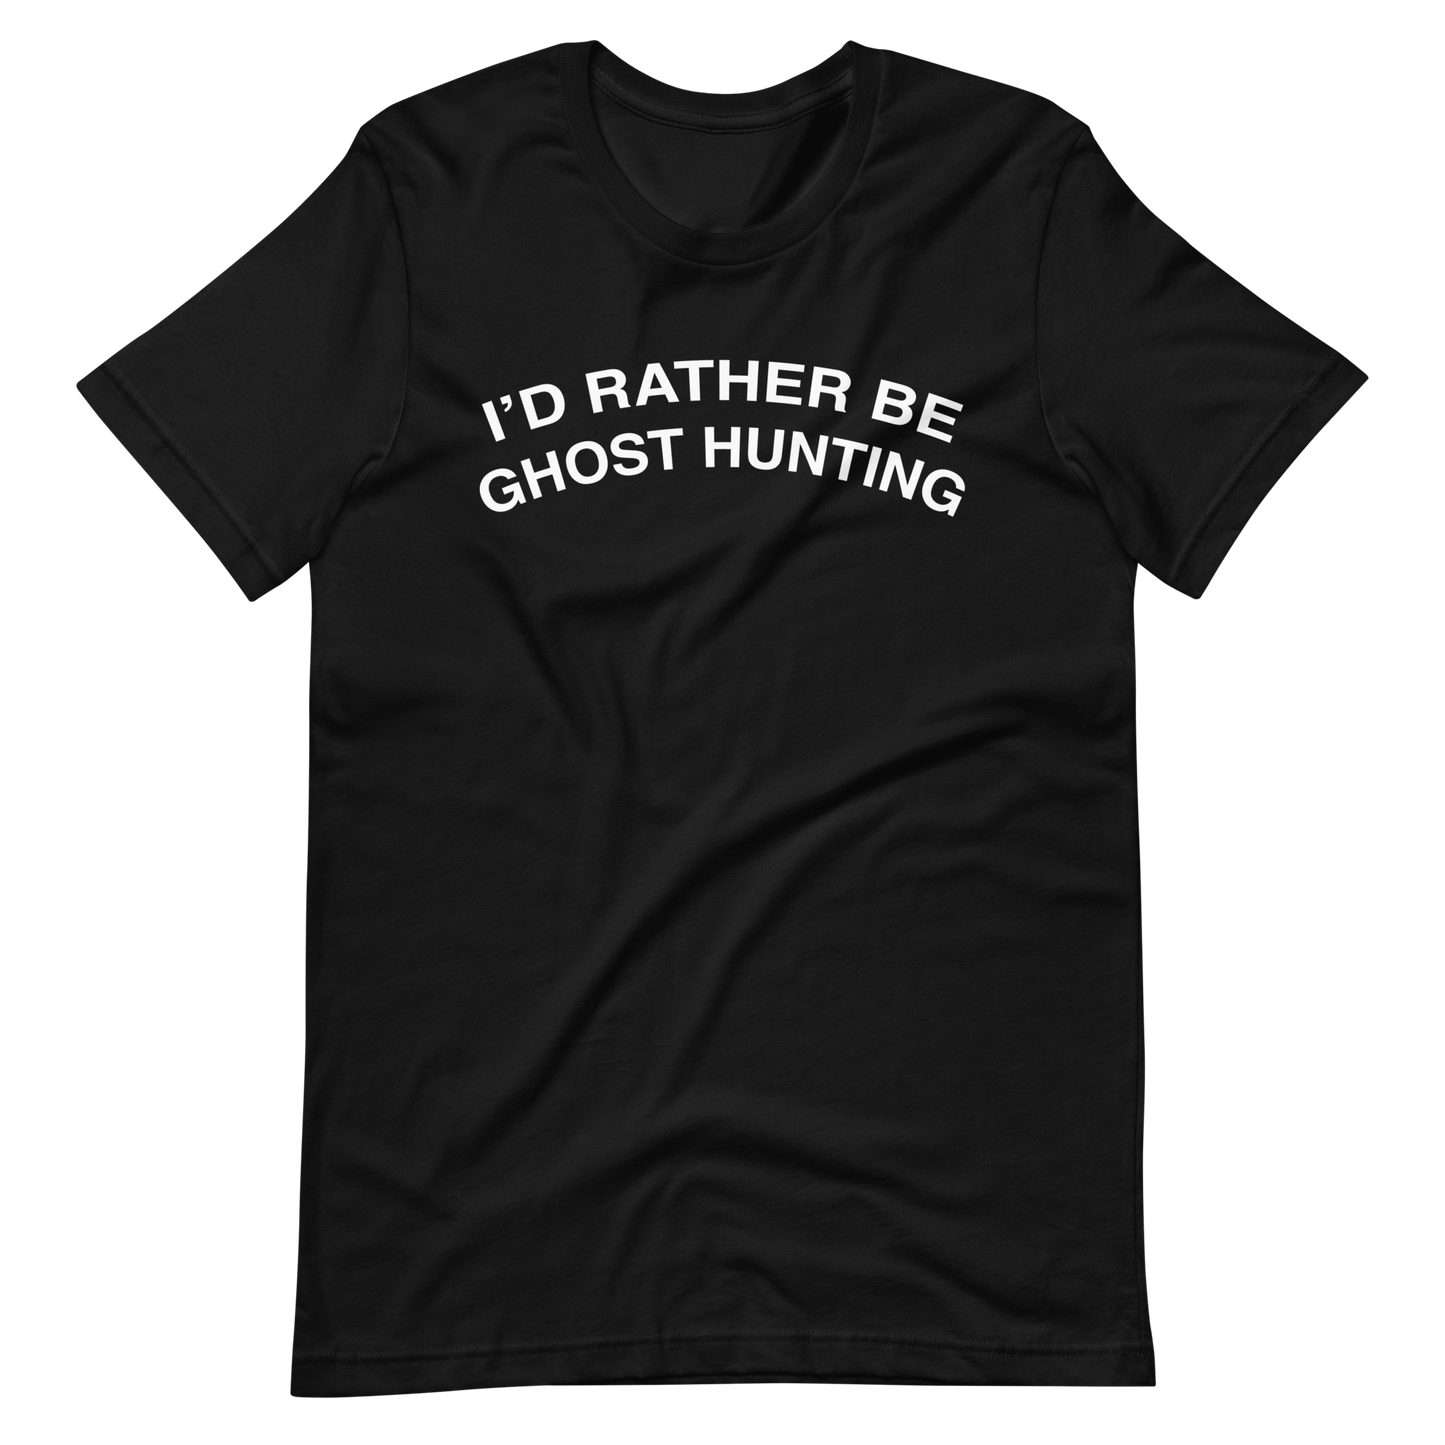 I'd Rather Be Ghost Hunting Tee